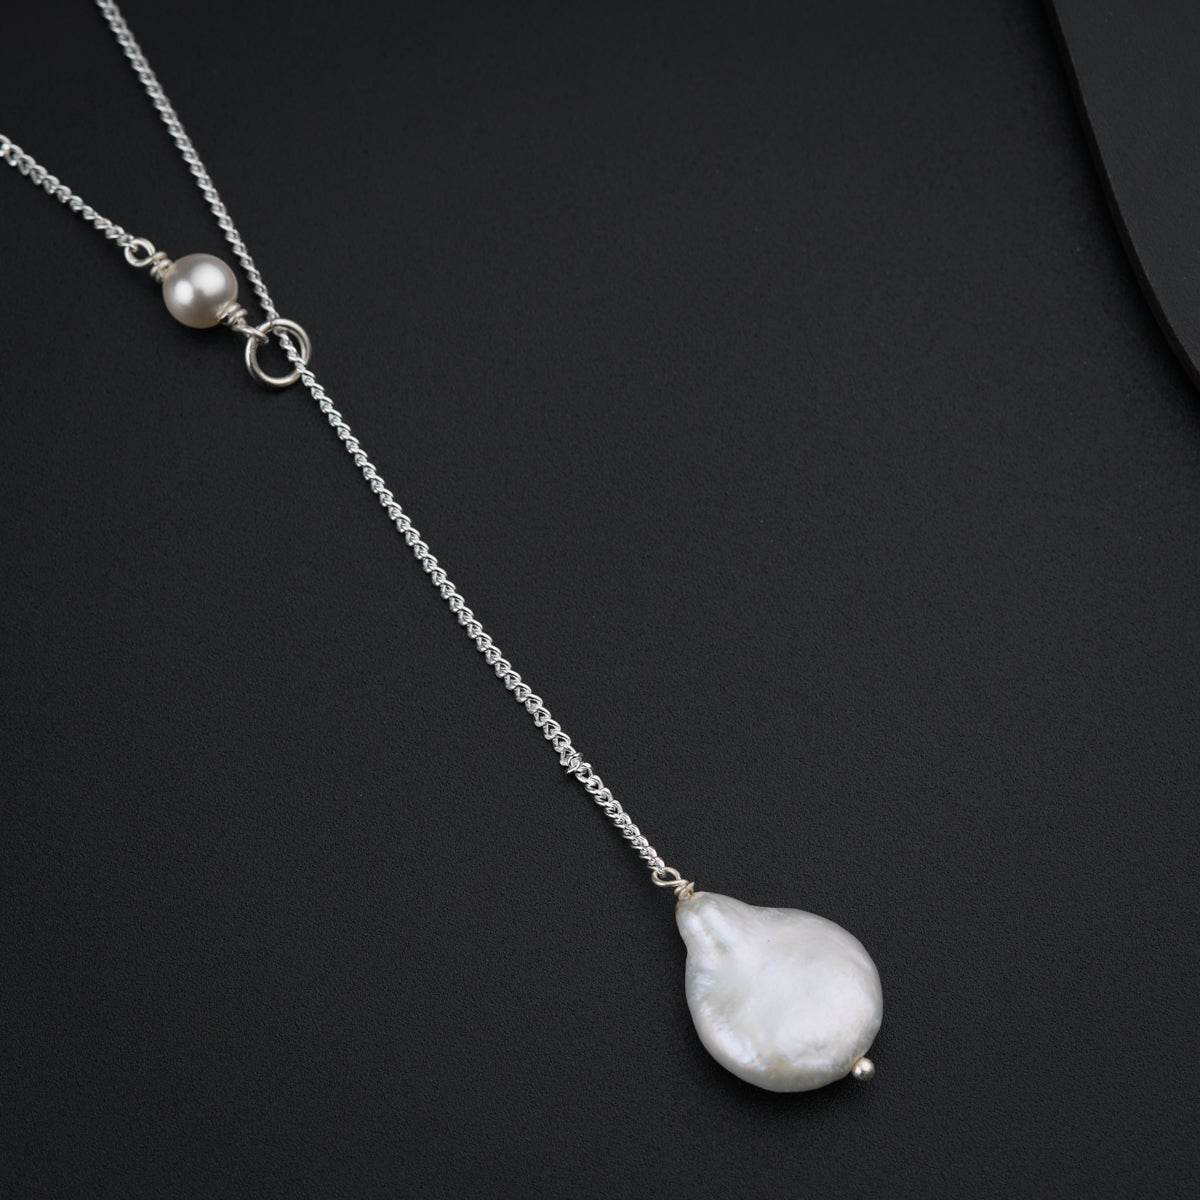 Dainty Silver Necklace With High Quality Pearls